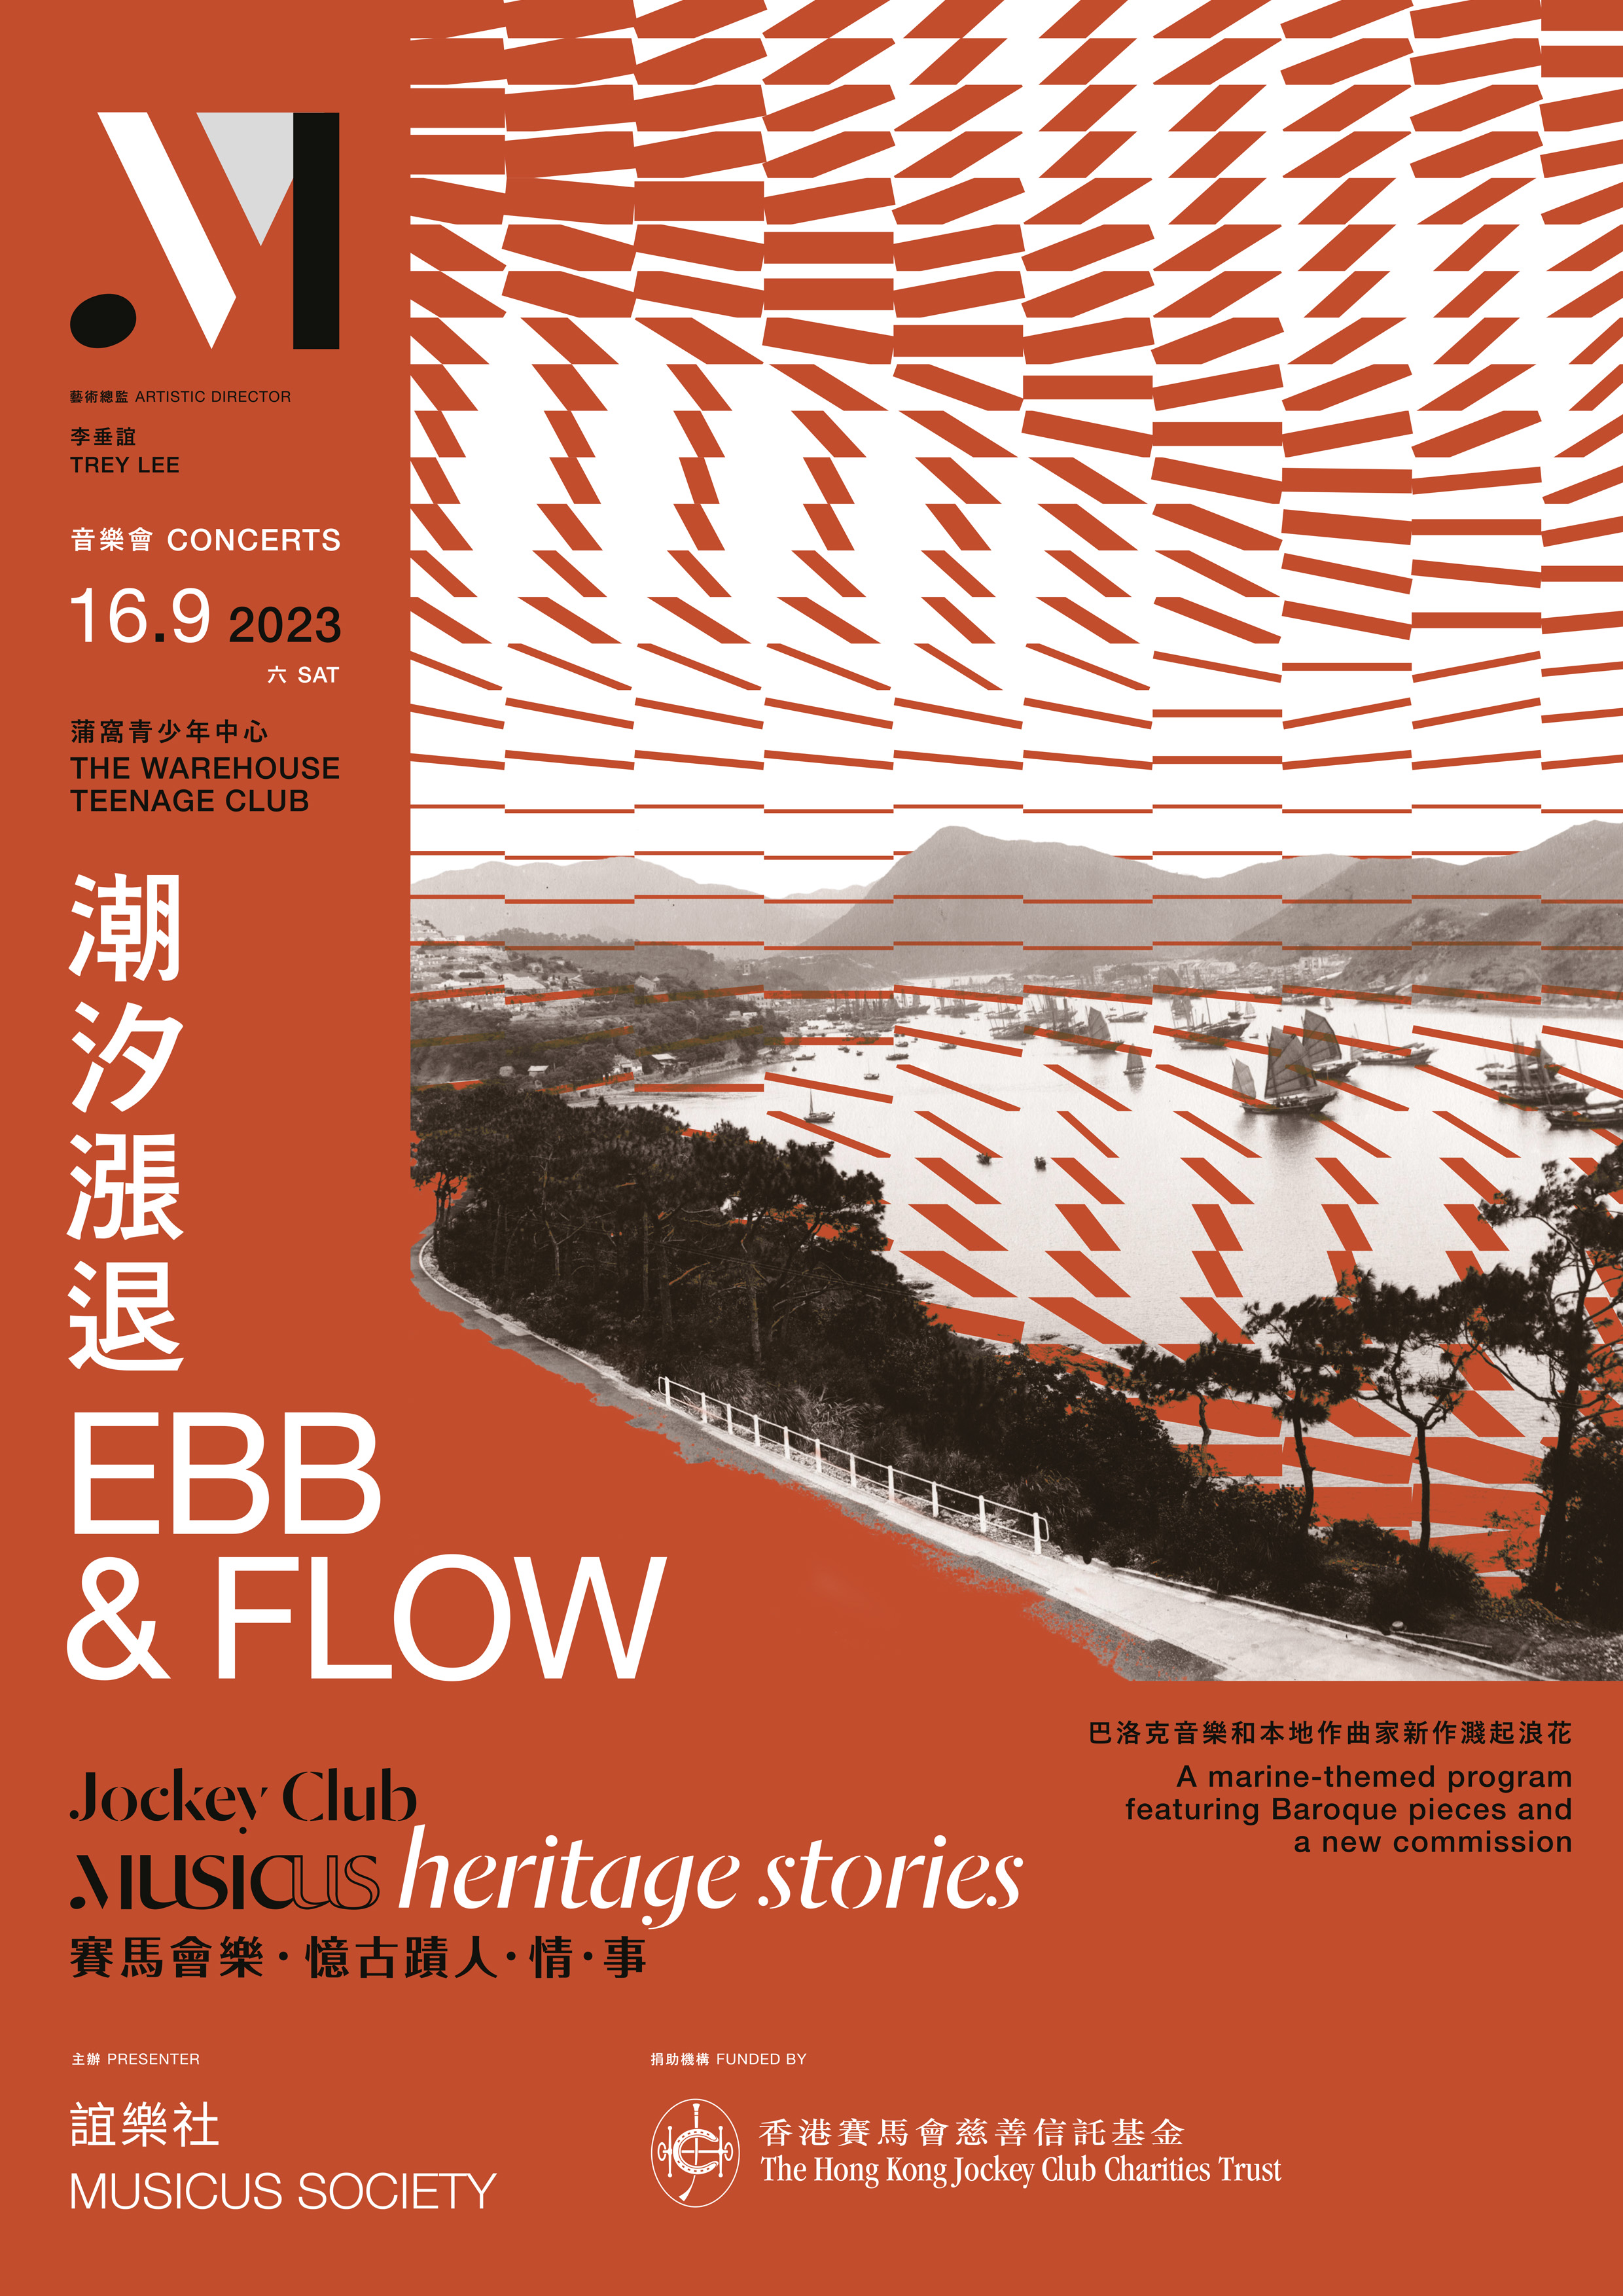 Jockey Club Musicus Heritage Stories Concerts: Ebb and Flow